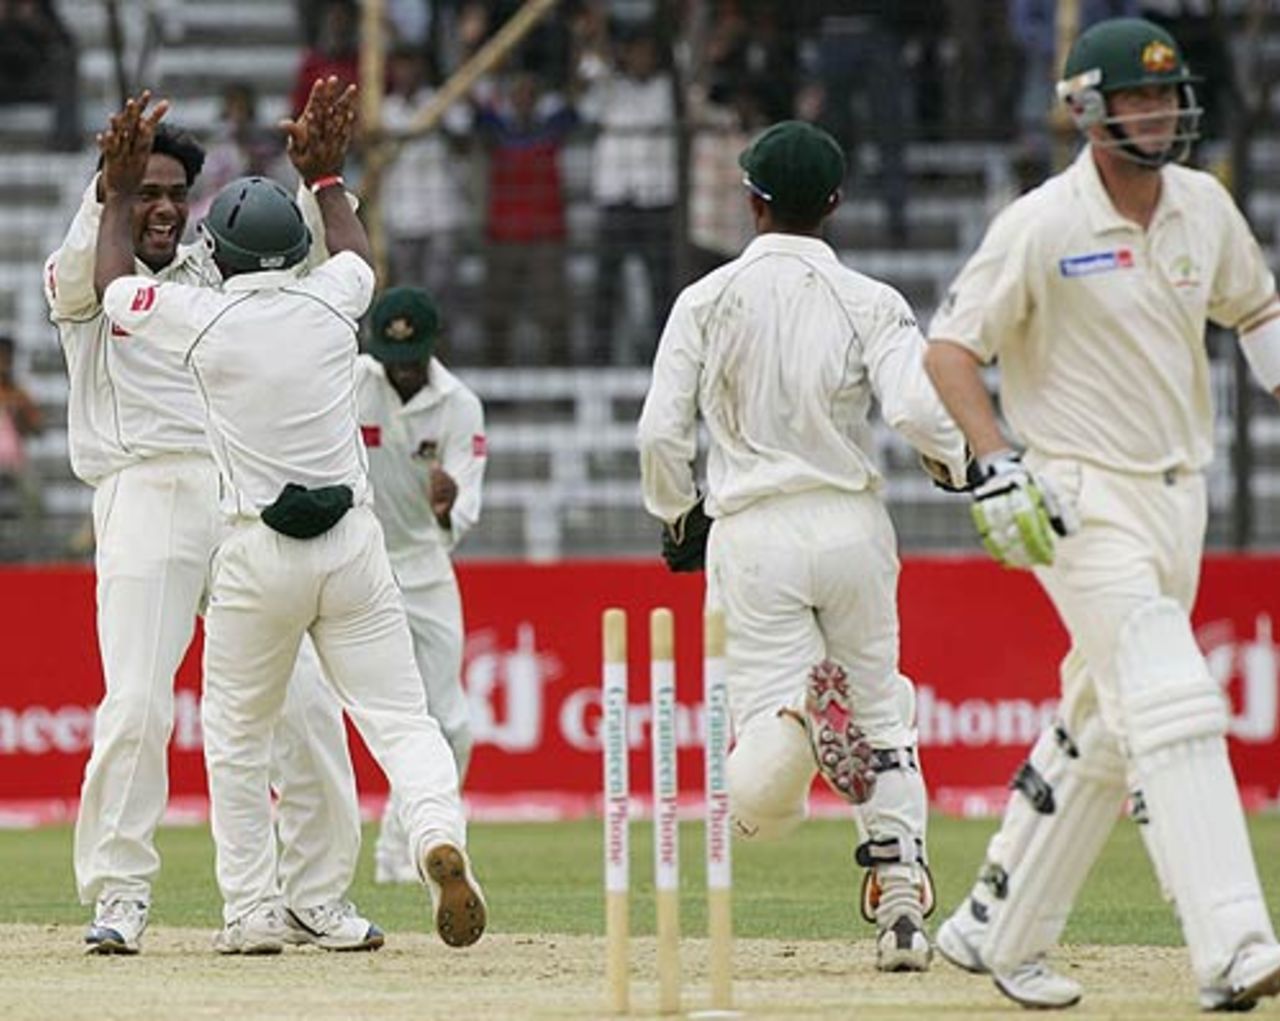 Mohammad Rafique bowled Damien Martyn in the last over before tea, Bangladesh v Australia, 1st Test, Fatullah, 2nd day, April 10, 2006